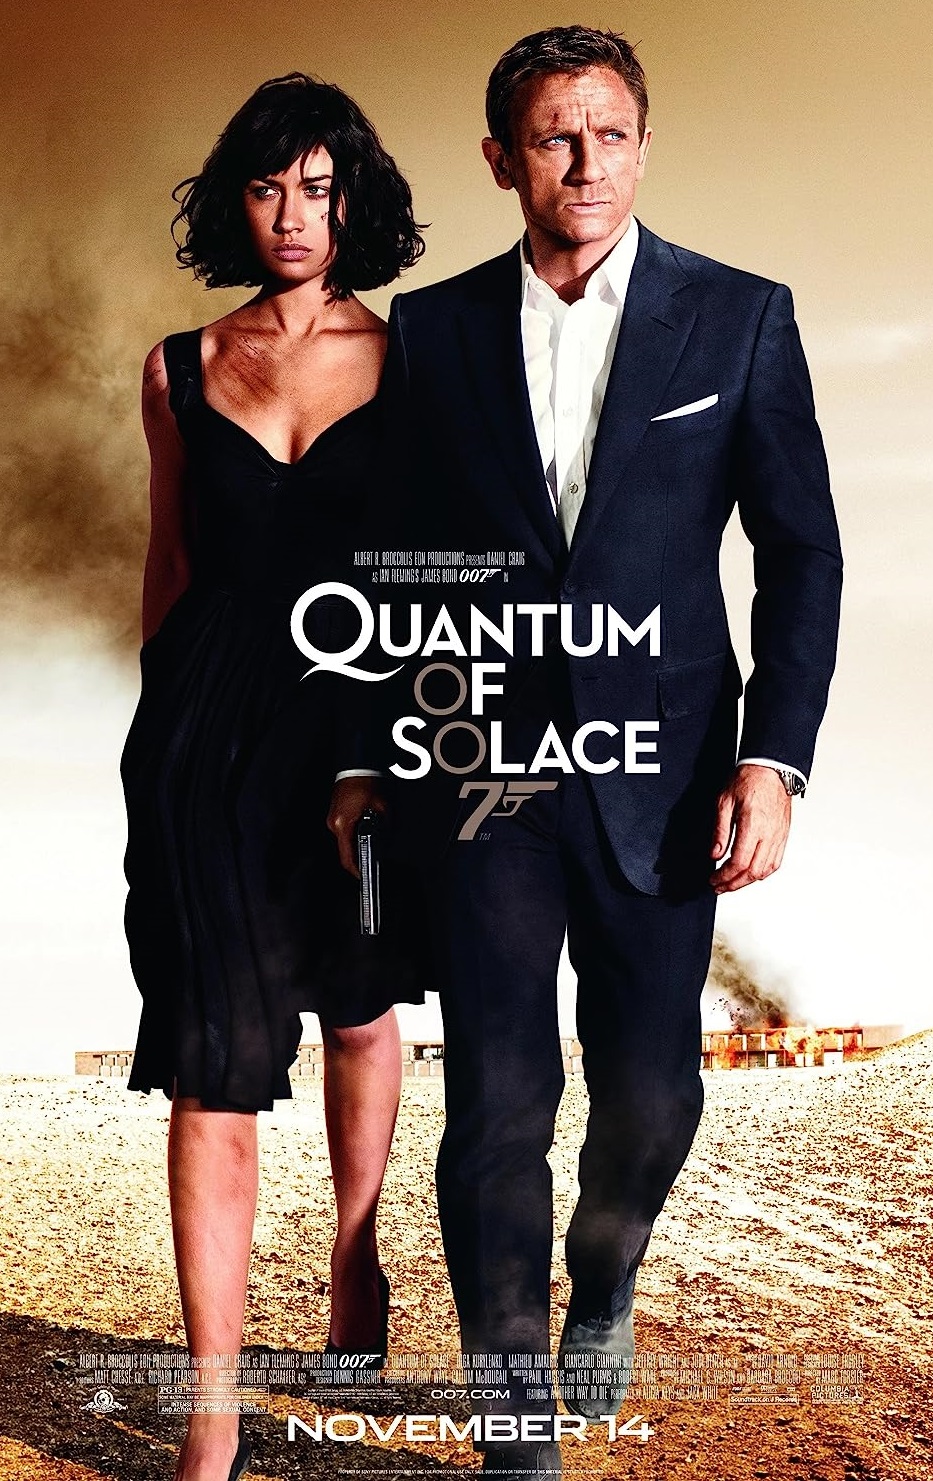 Quantum of Solace 2008 Tamil Dubbed Action Movie Online